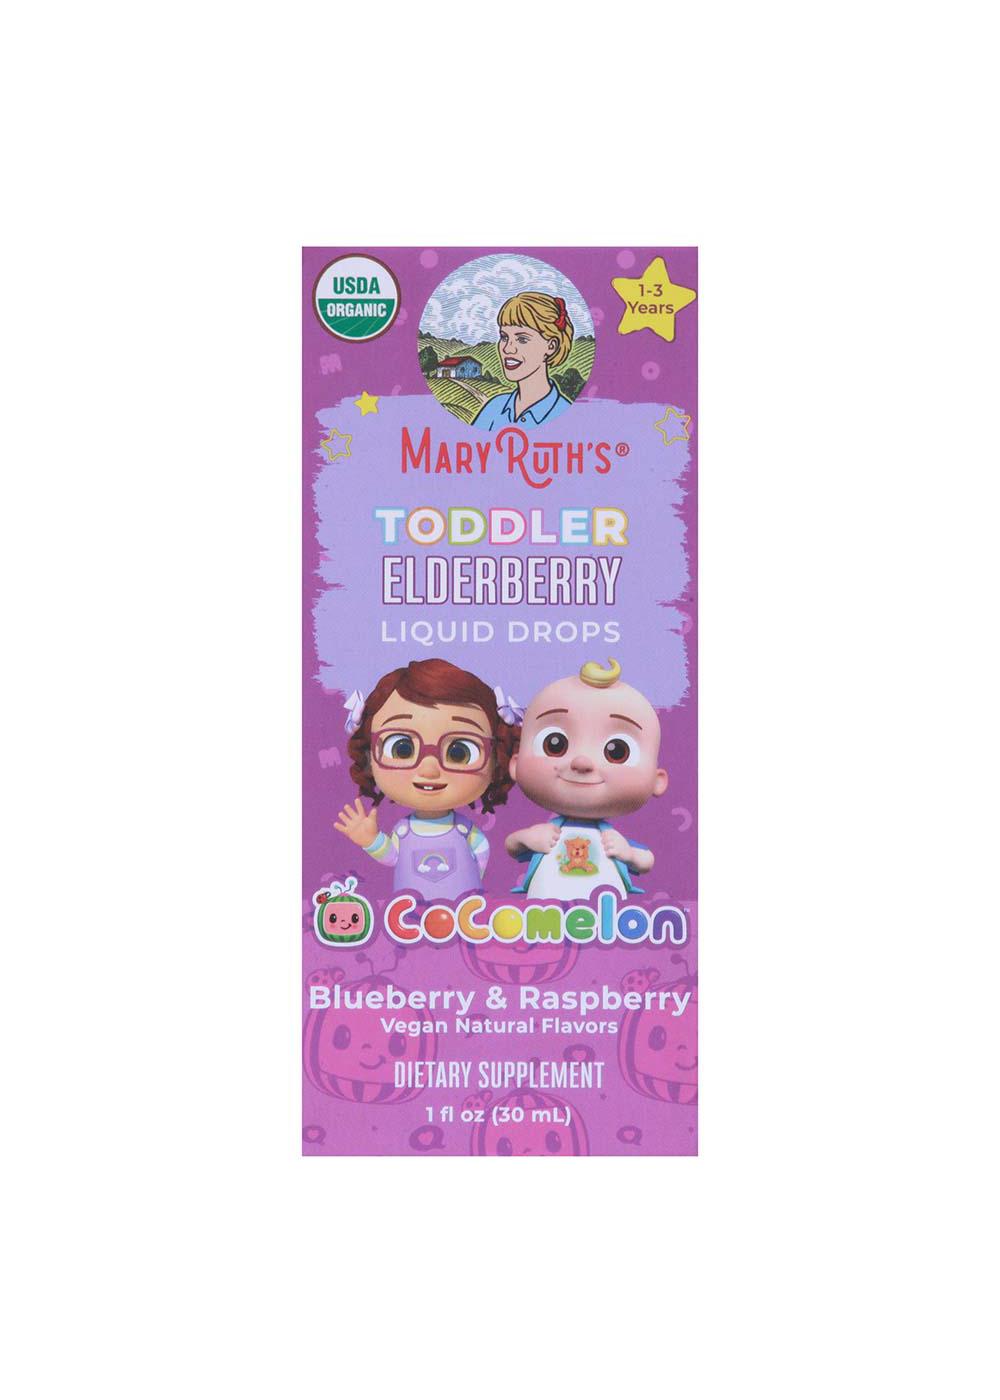 Mary Ruth's Toddler Elderberry Liquid Drops - Blueberry & Raspberry; image 1 of 2